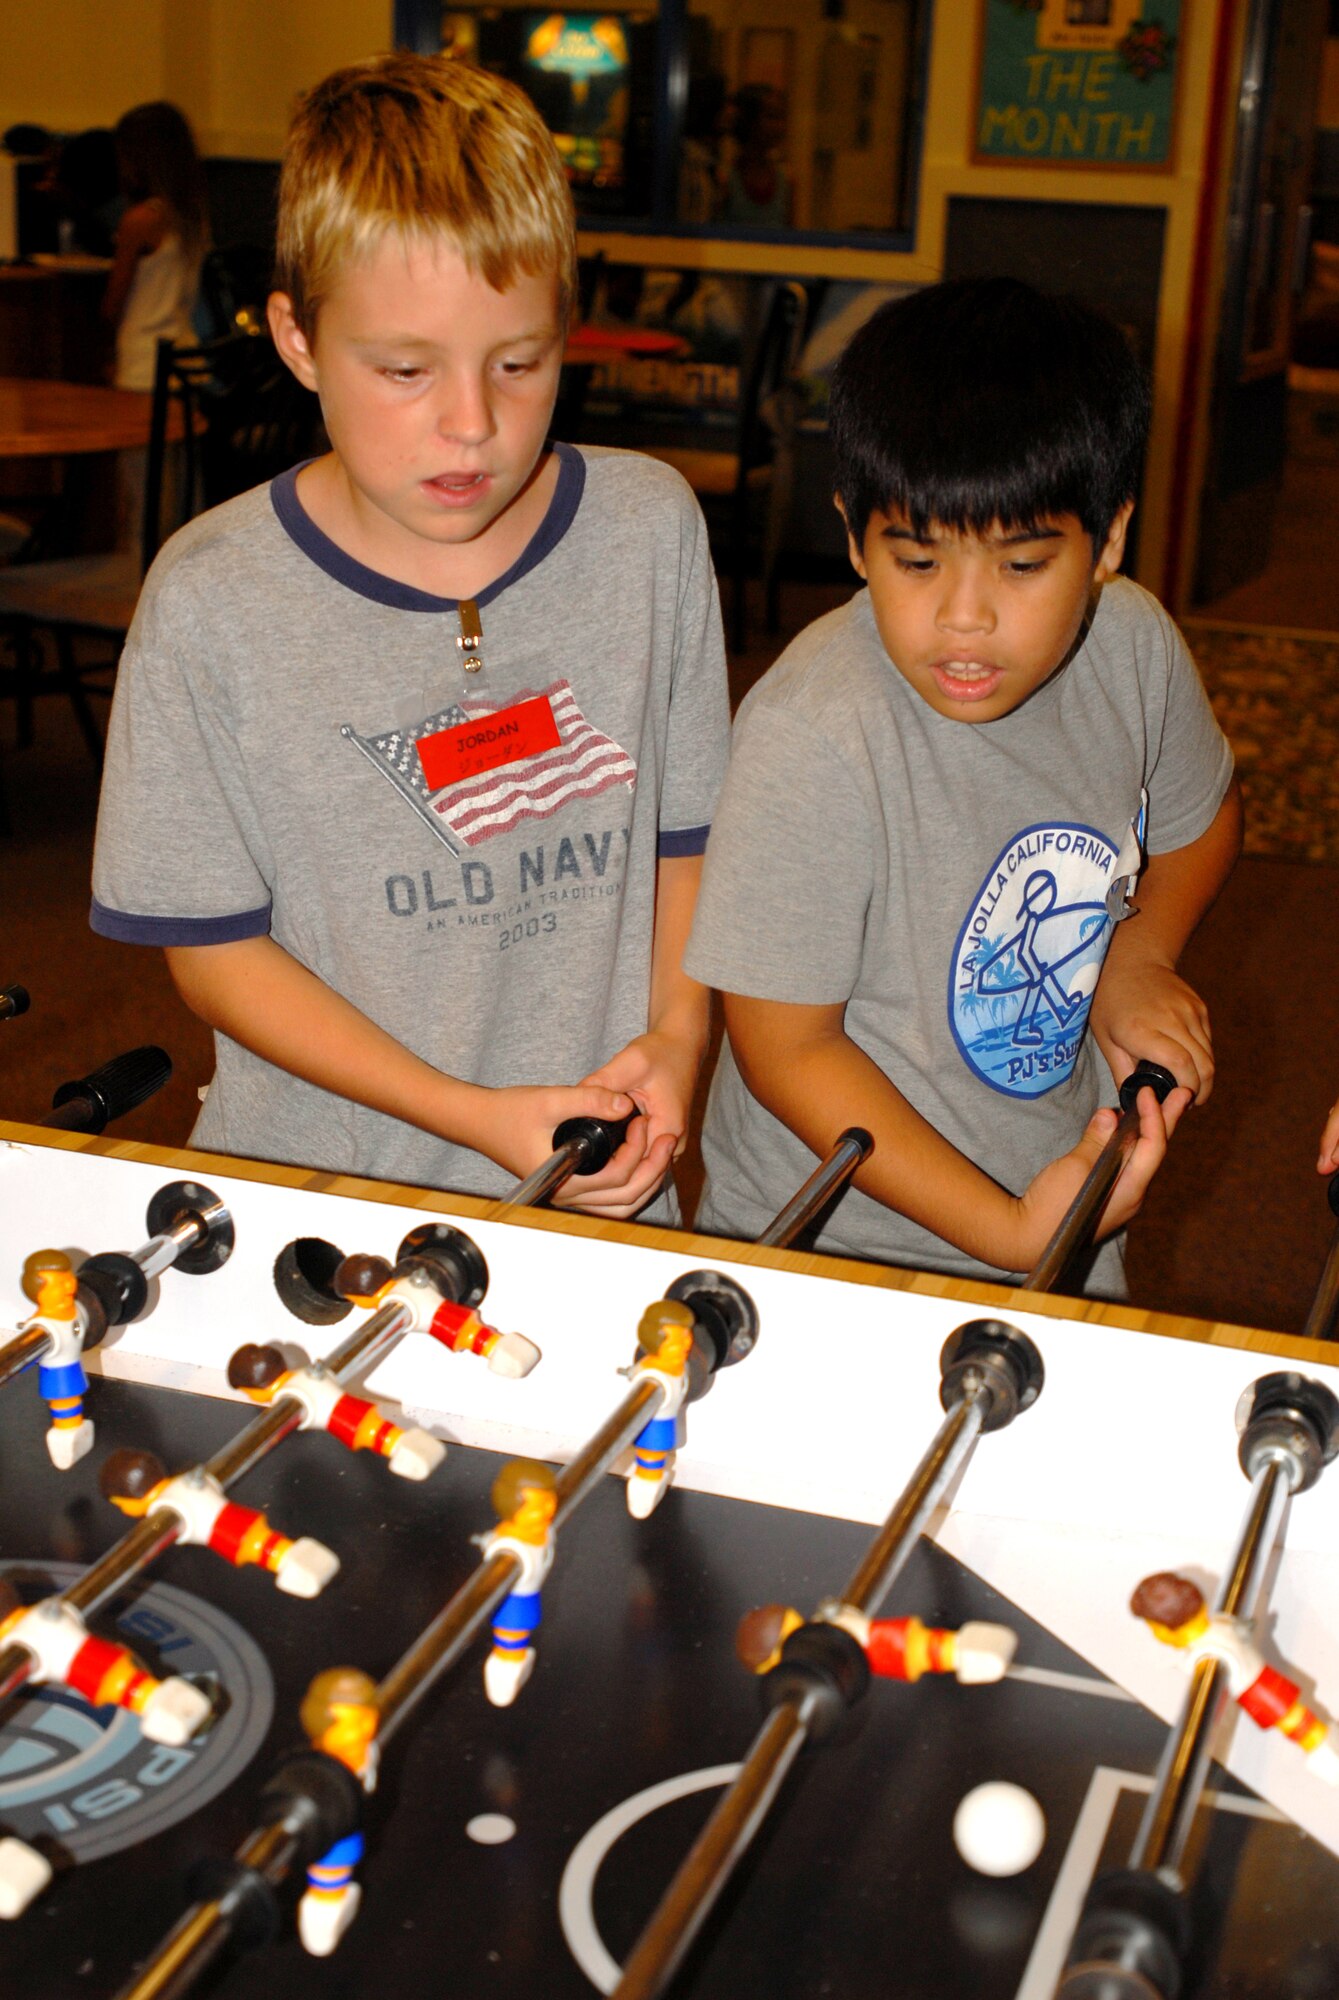 Jordan Holliday (left), son of Army Sgt. 1st Class Anton Engelmann, 1-1 Special Forces Group, Torii Station, teams up with Ryouji Takamine, one of the Okinawan children sponsored by the Chatan Lion’s Club, for a game of foosball during the Kadena and Chatan Town lock-in cultural exchange Aug. 10. The 18th Services Squadron youth center staff and the Chatan Lion’s Club organized the event, which began at 8 p.m. and lasted until 8 a.m. the next day. 
(U.S. Air Force photo/Senior Airman Nestor Cruz)